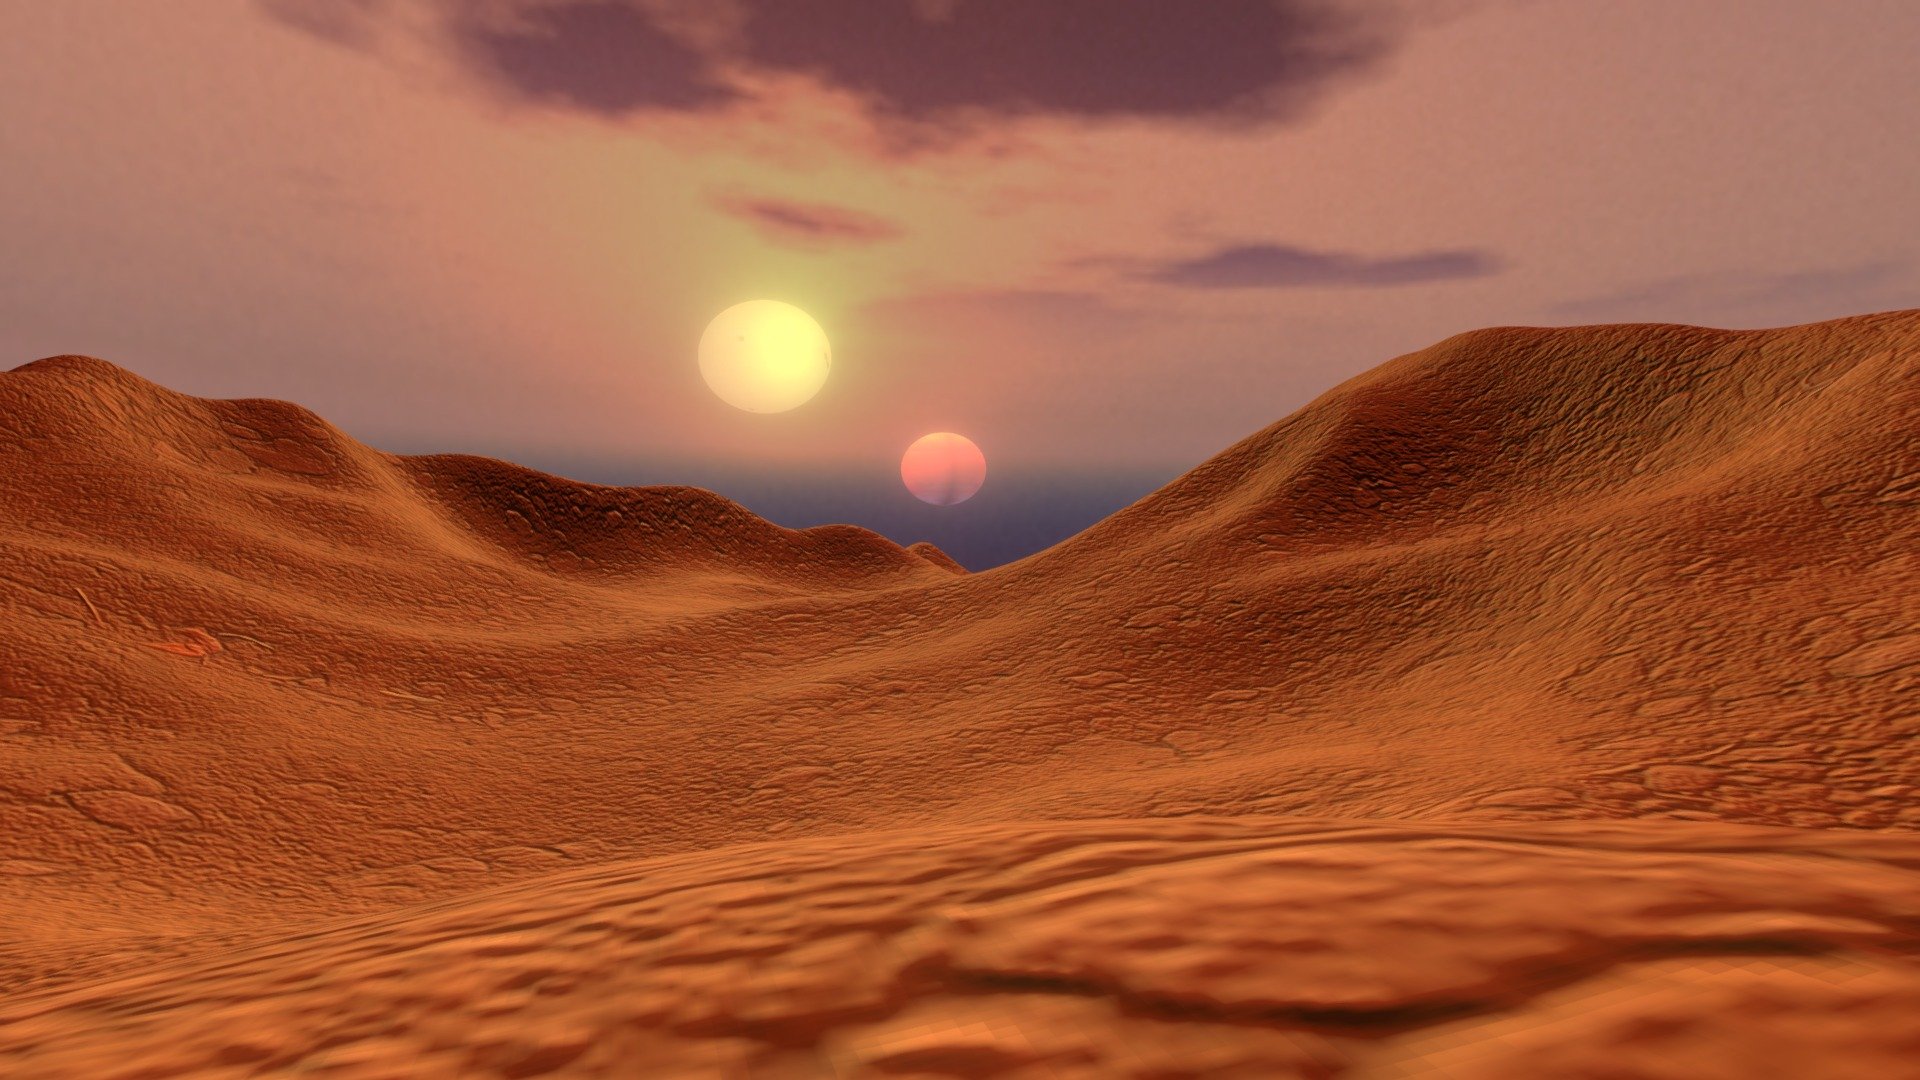 The model represents a sunset over the Tatooine desert. Tatooine is a fictional planet that appears in the Star Wars saga. The planet is a vast desolate desert and orbits a close binary system consisting of a pair of G-type stars. At the time Tatooine was created by George Lucas, no extrasolar planets had yet been discovered. Today, we know the existence, in our galaxy, of thousands of stars with planets in orbit around them.  Some of these are circumbinary planets, i.e. planets that orbit two stars instead of one &hellip; like Tatooine. An example is HD 202206, in which a Jupiter-size planet orbits a system consisting of a Sun-like star and a brown dwarf. Currently none of the known circumbinary planets are terrestrial planets located in the habitable zone. However, we cannot exclude the existence of circumbinary planets similar to Tatooine. 

Credits: Image of the sky created by Matthias Kappenburg 3d model